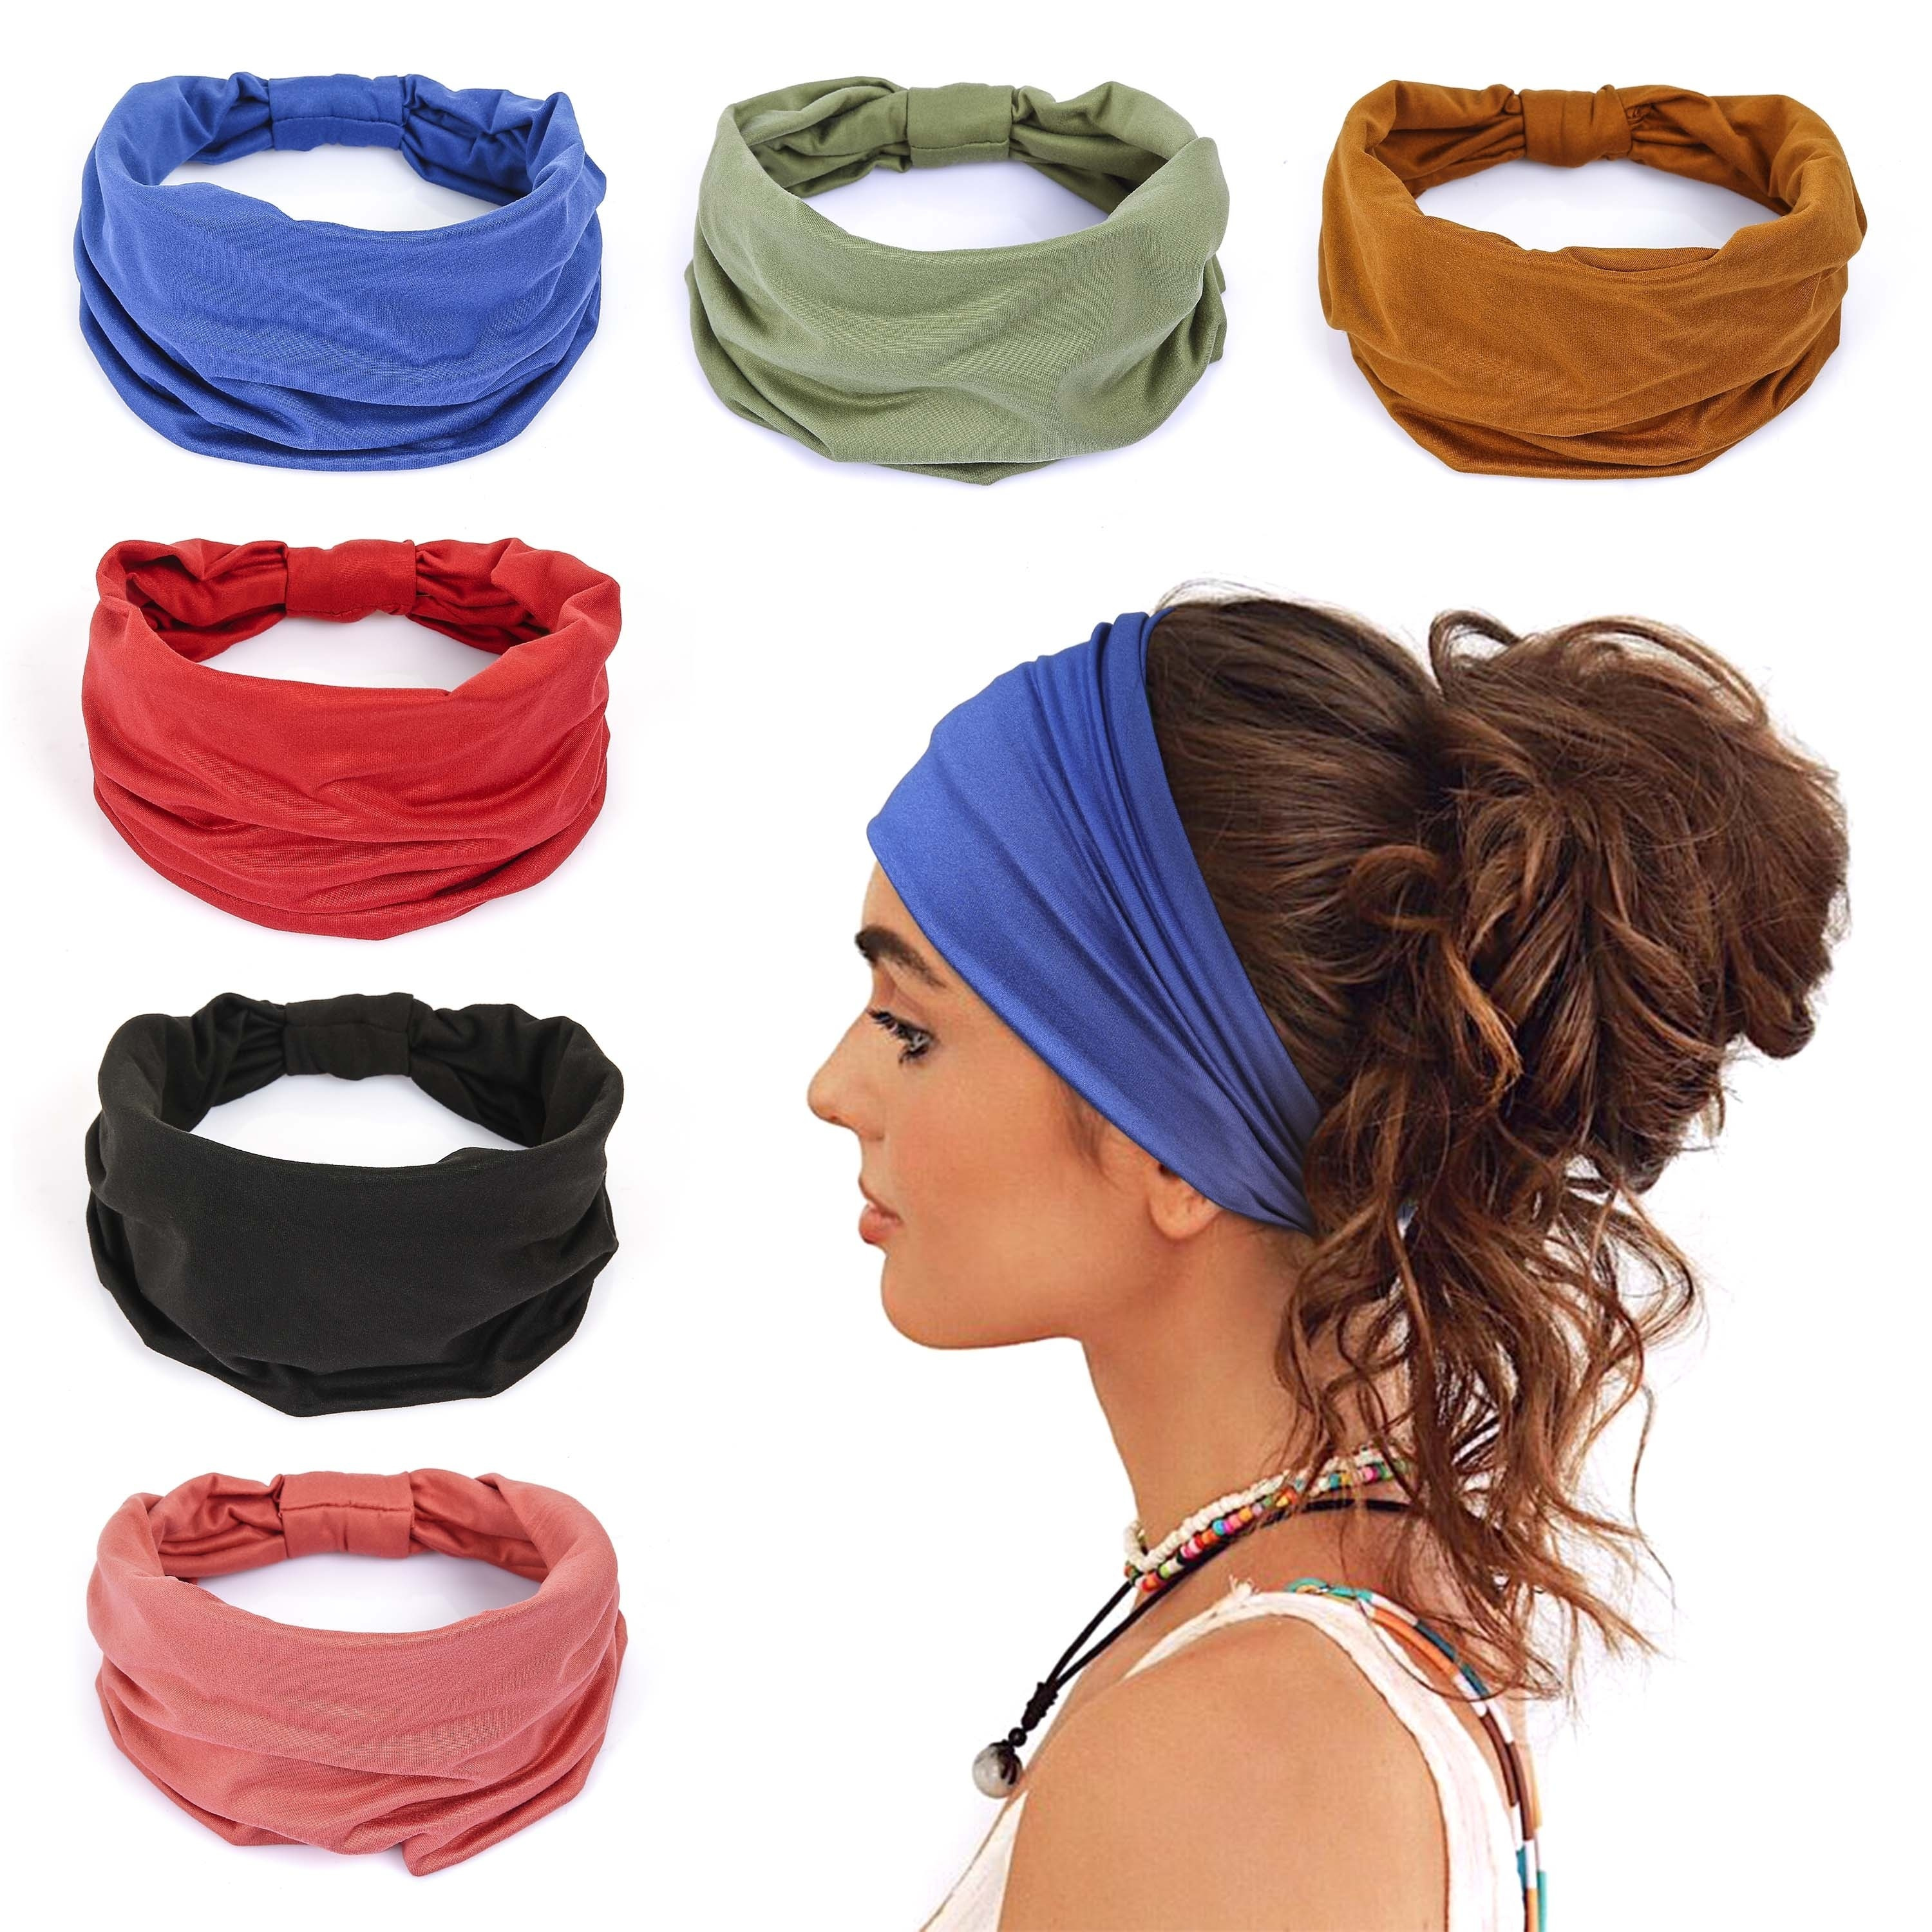 

Wide Headbands For Women Non Slip Soft Elastic Hair Bands Yoga Running Sports Workout Gym Head Wraps, Knotted Cloth African Turbans Bandana